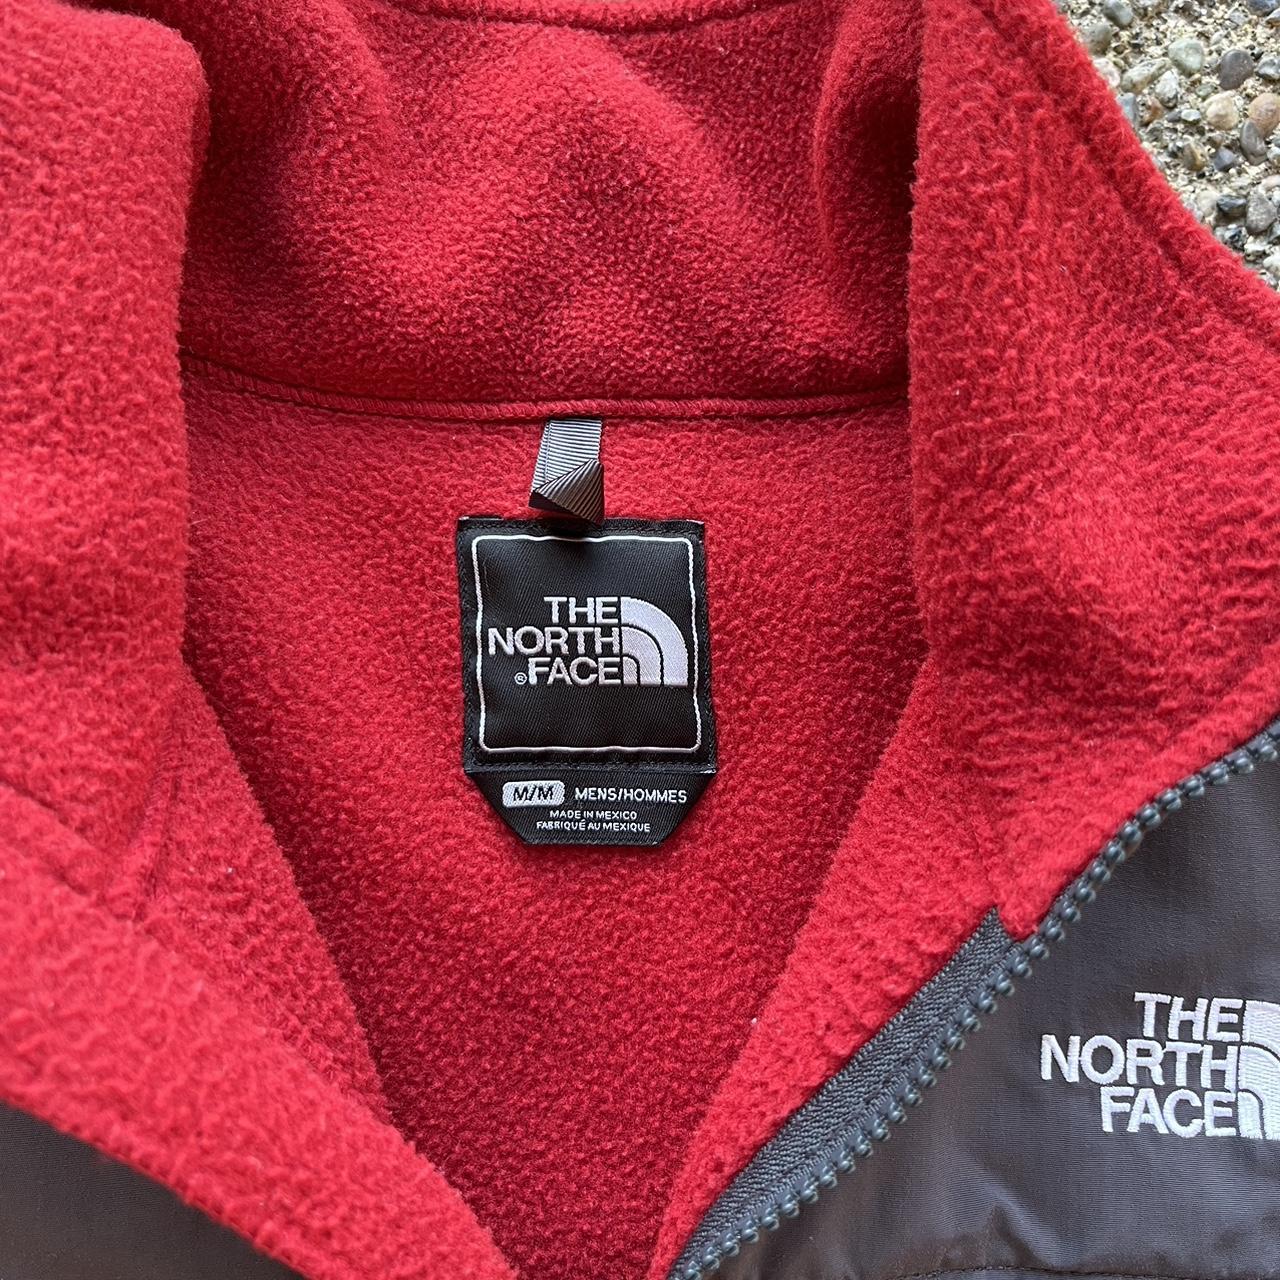 The North Face Men's Red and Grey Jacket (2)